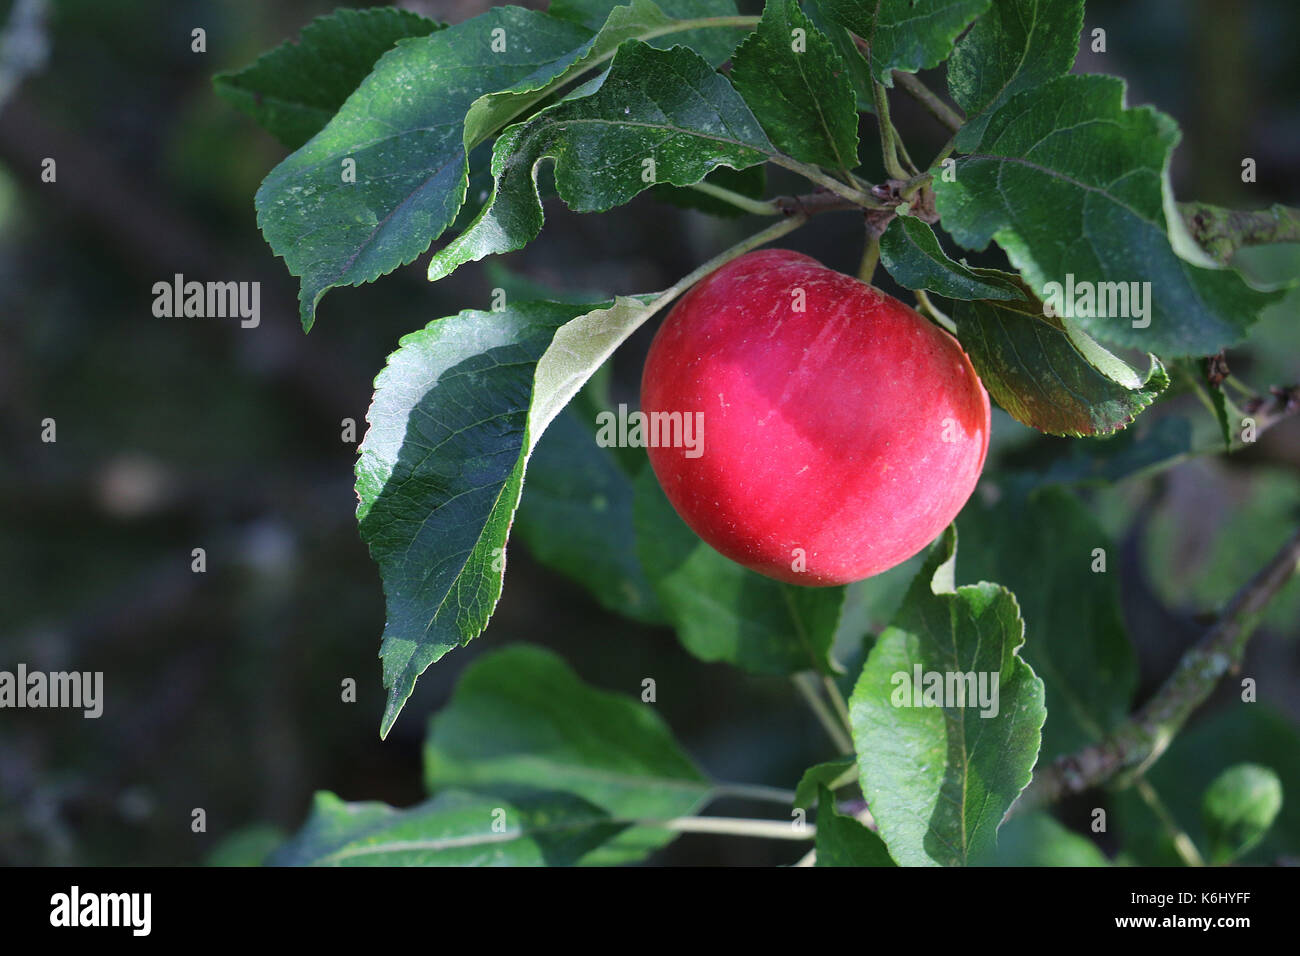 Single ripe red Discovery Apple fruit, Malus domestica, on an apple tree branch in late summer, Shropshire, England. Stock Photo